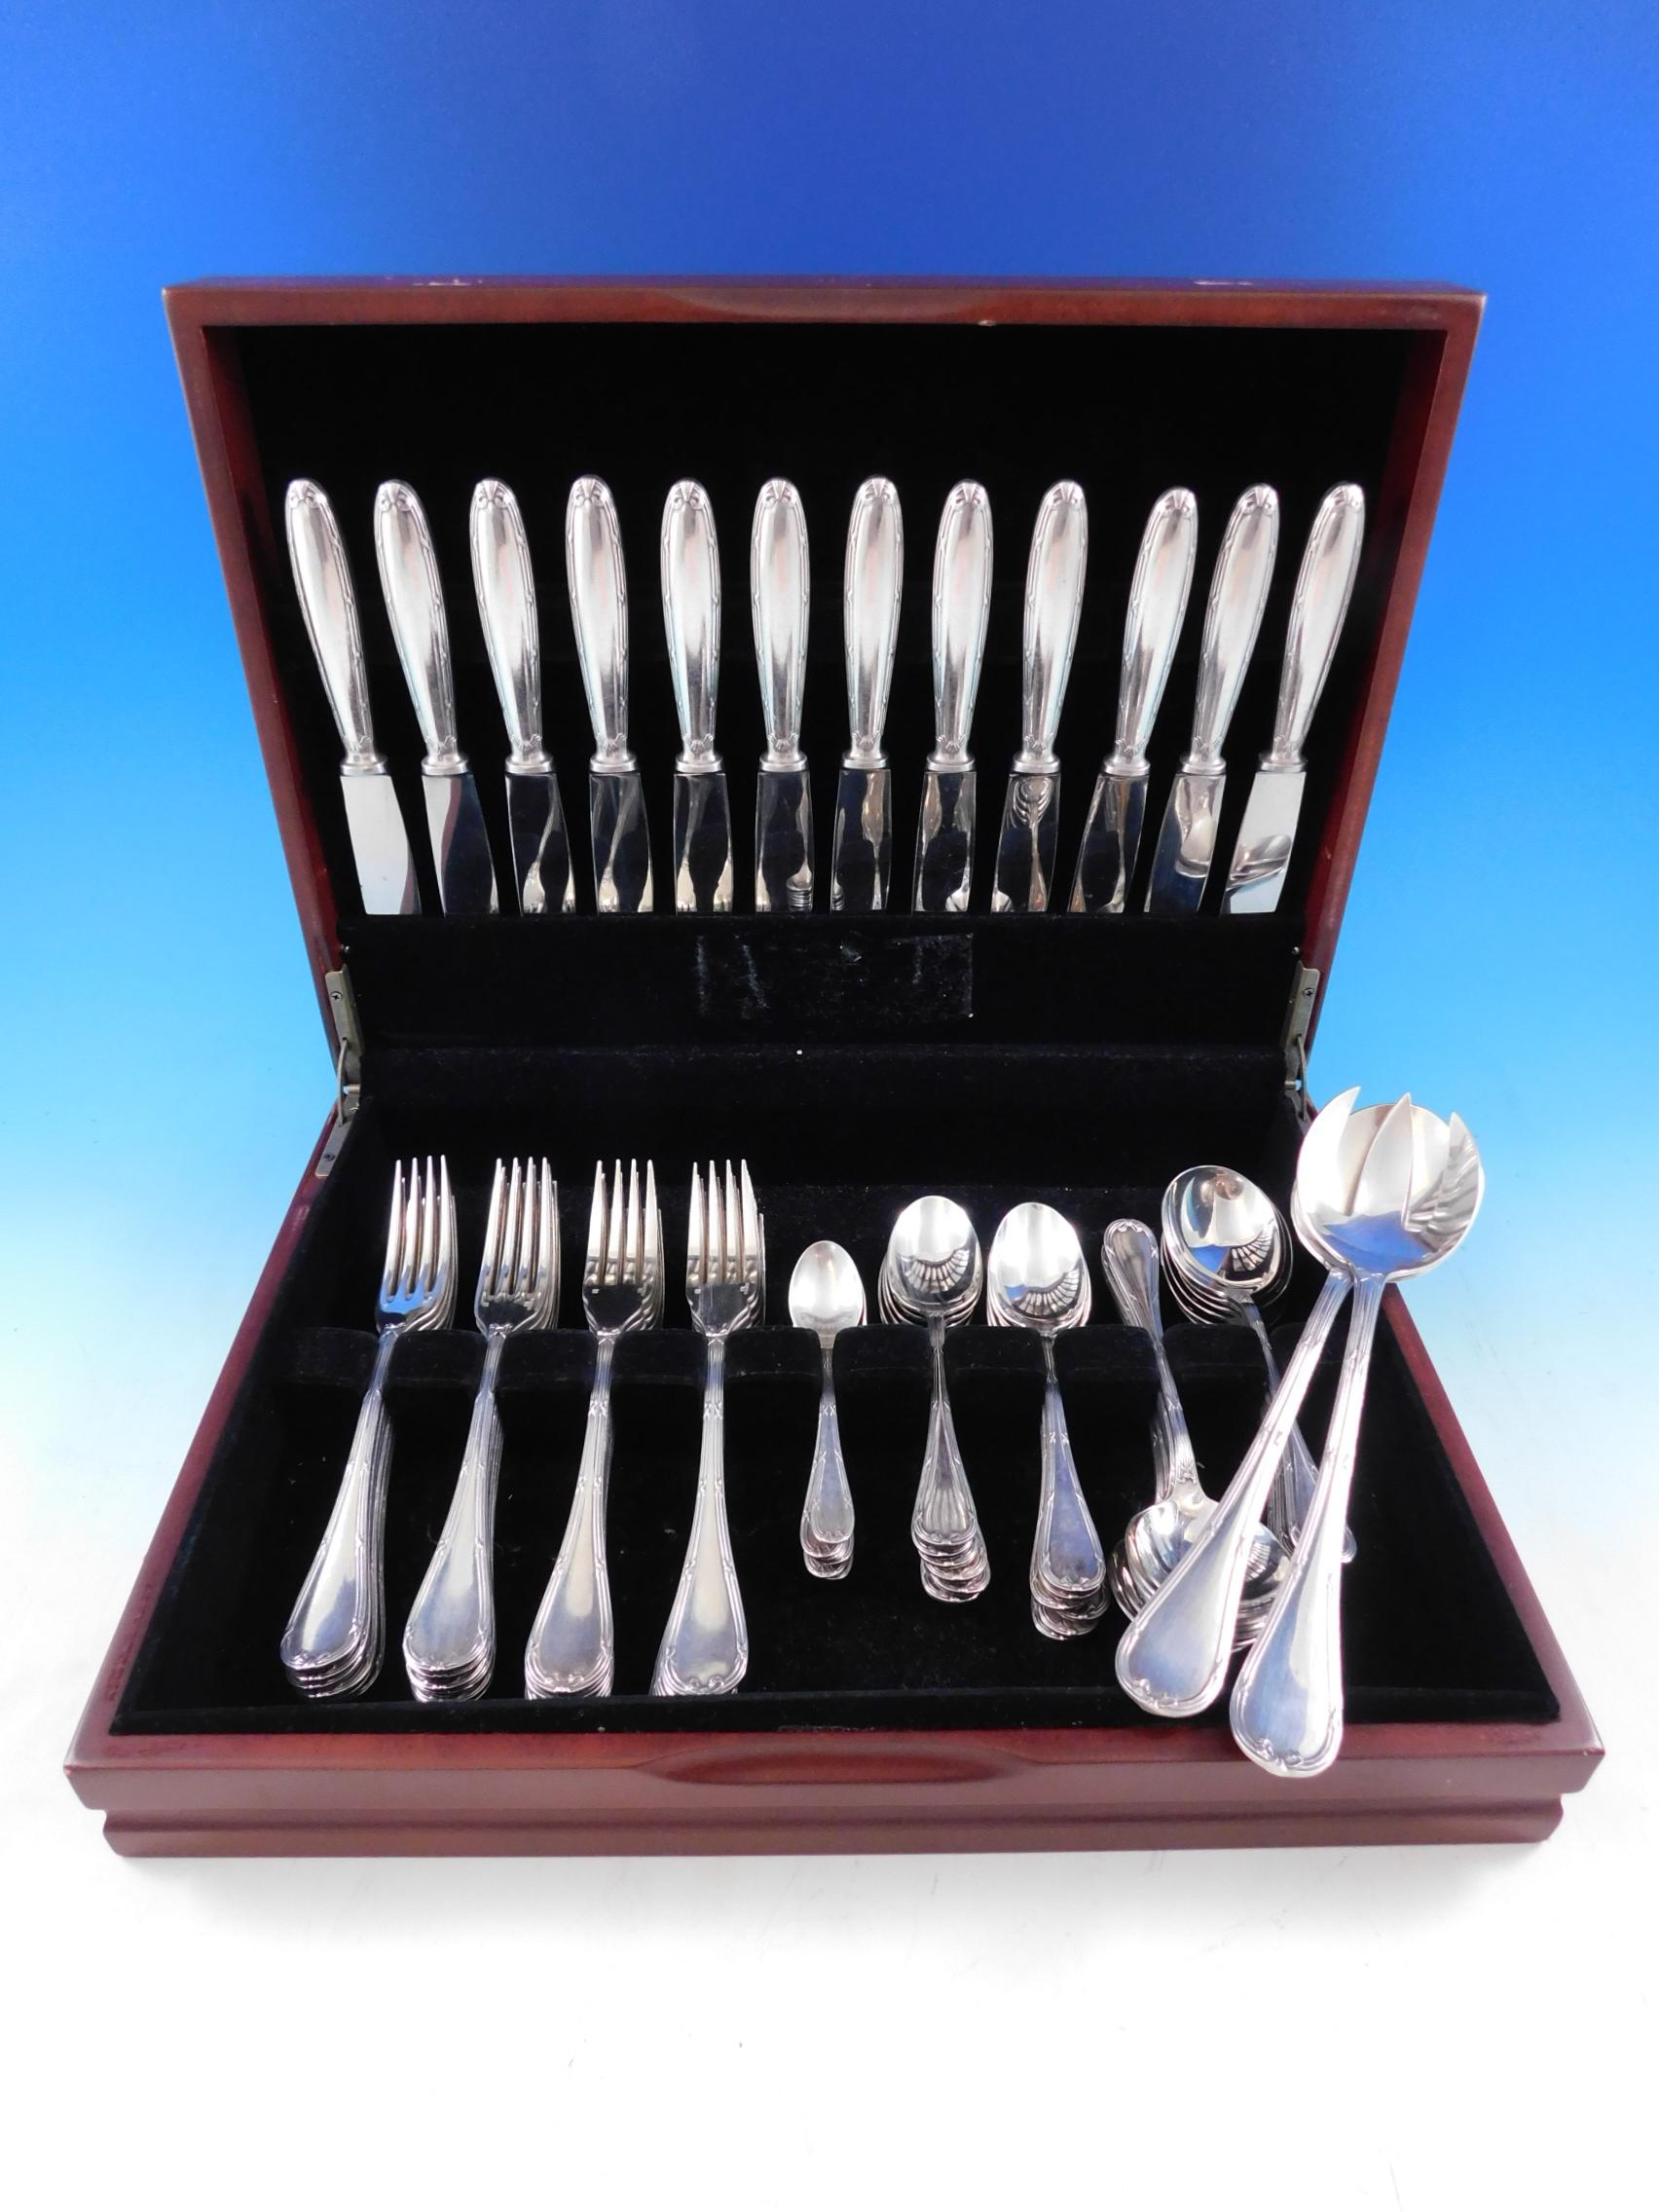 With a dedication to perfection and quality, Christofle flatware creations unite craftsmanship and modern technique, resulting in flatware to be handed down through generations. Created in 1907, Rubans is characterized by symmetrical ornamentation